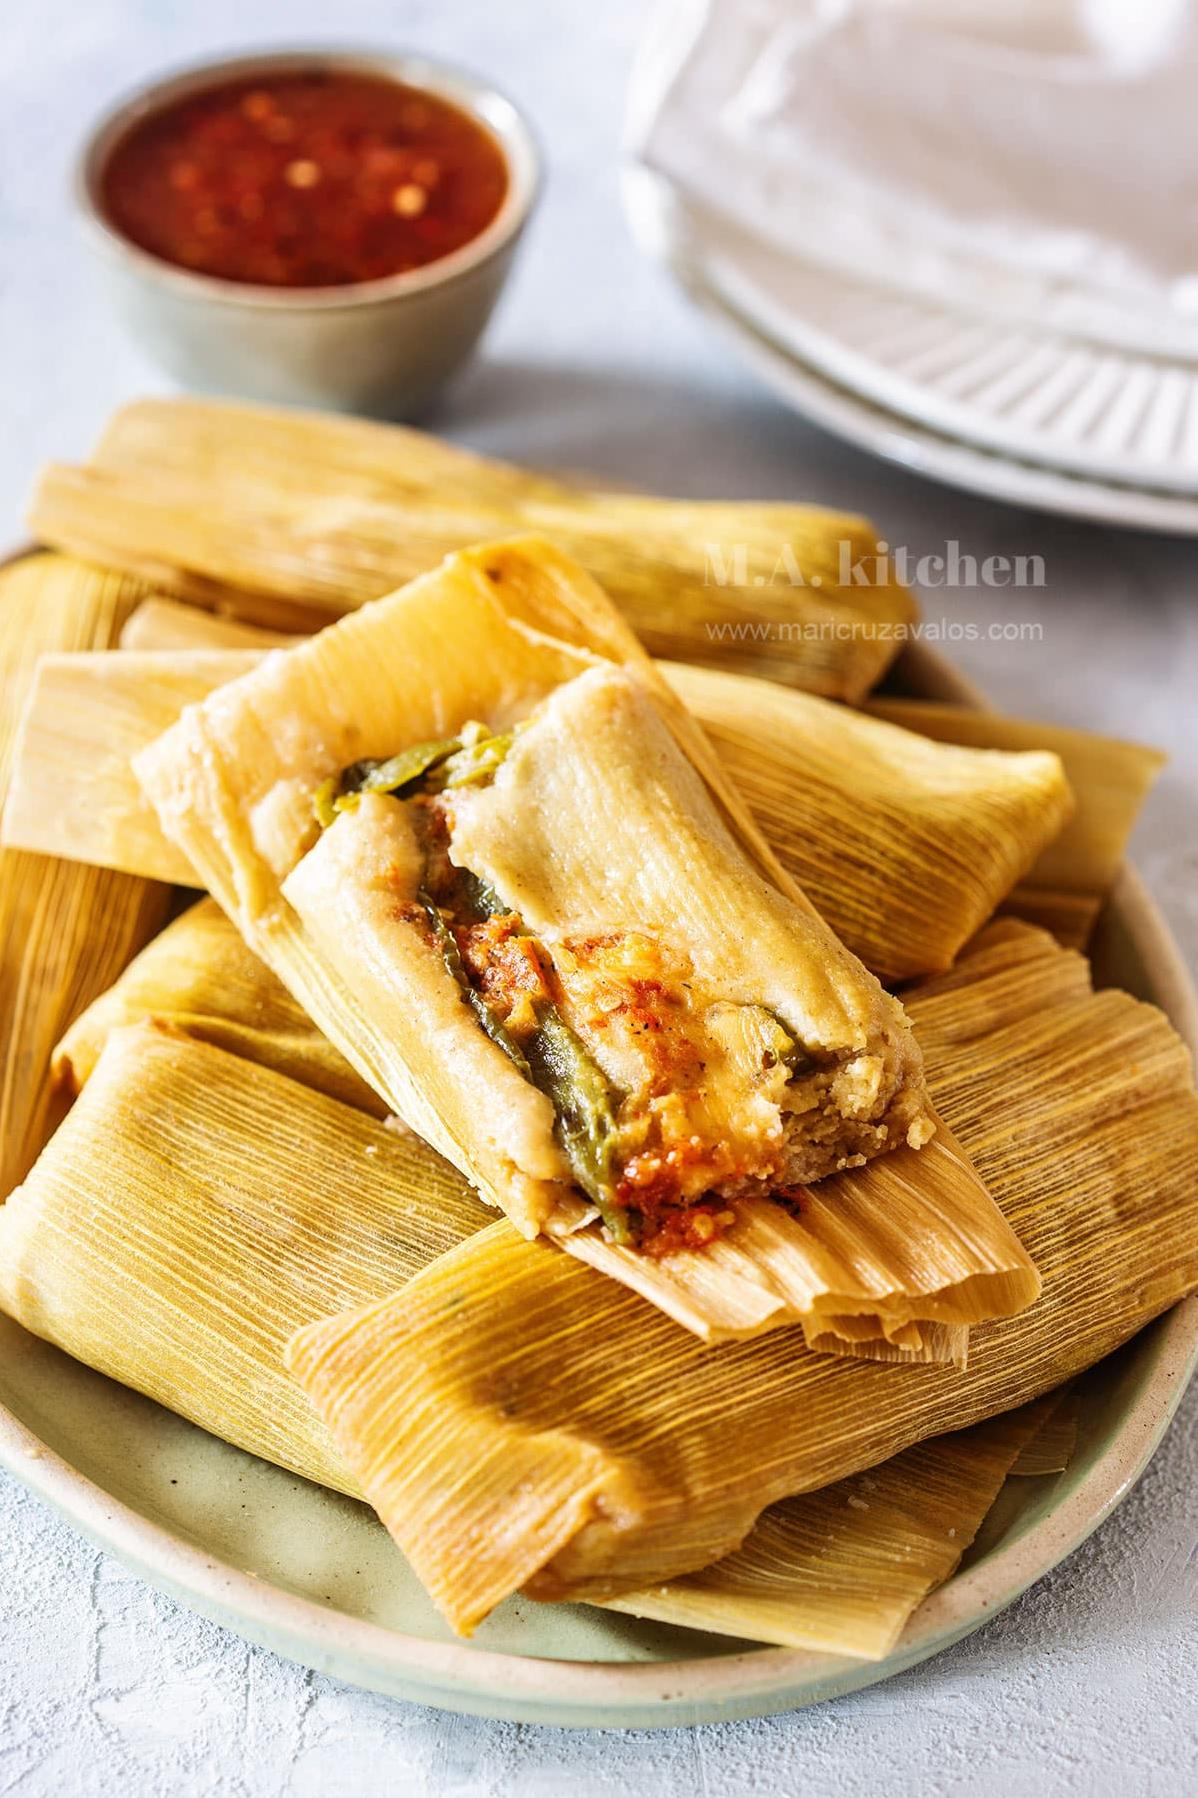  Have you ever had a tamale with olives and chilies? Now's your chance!